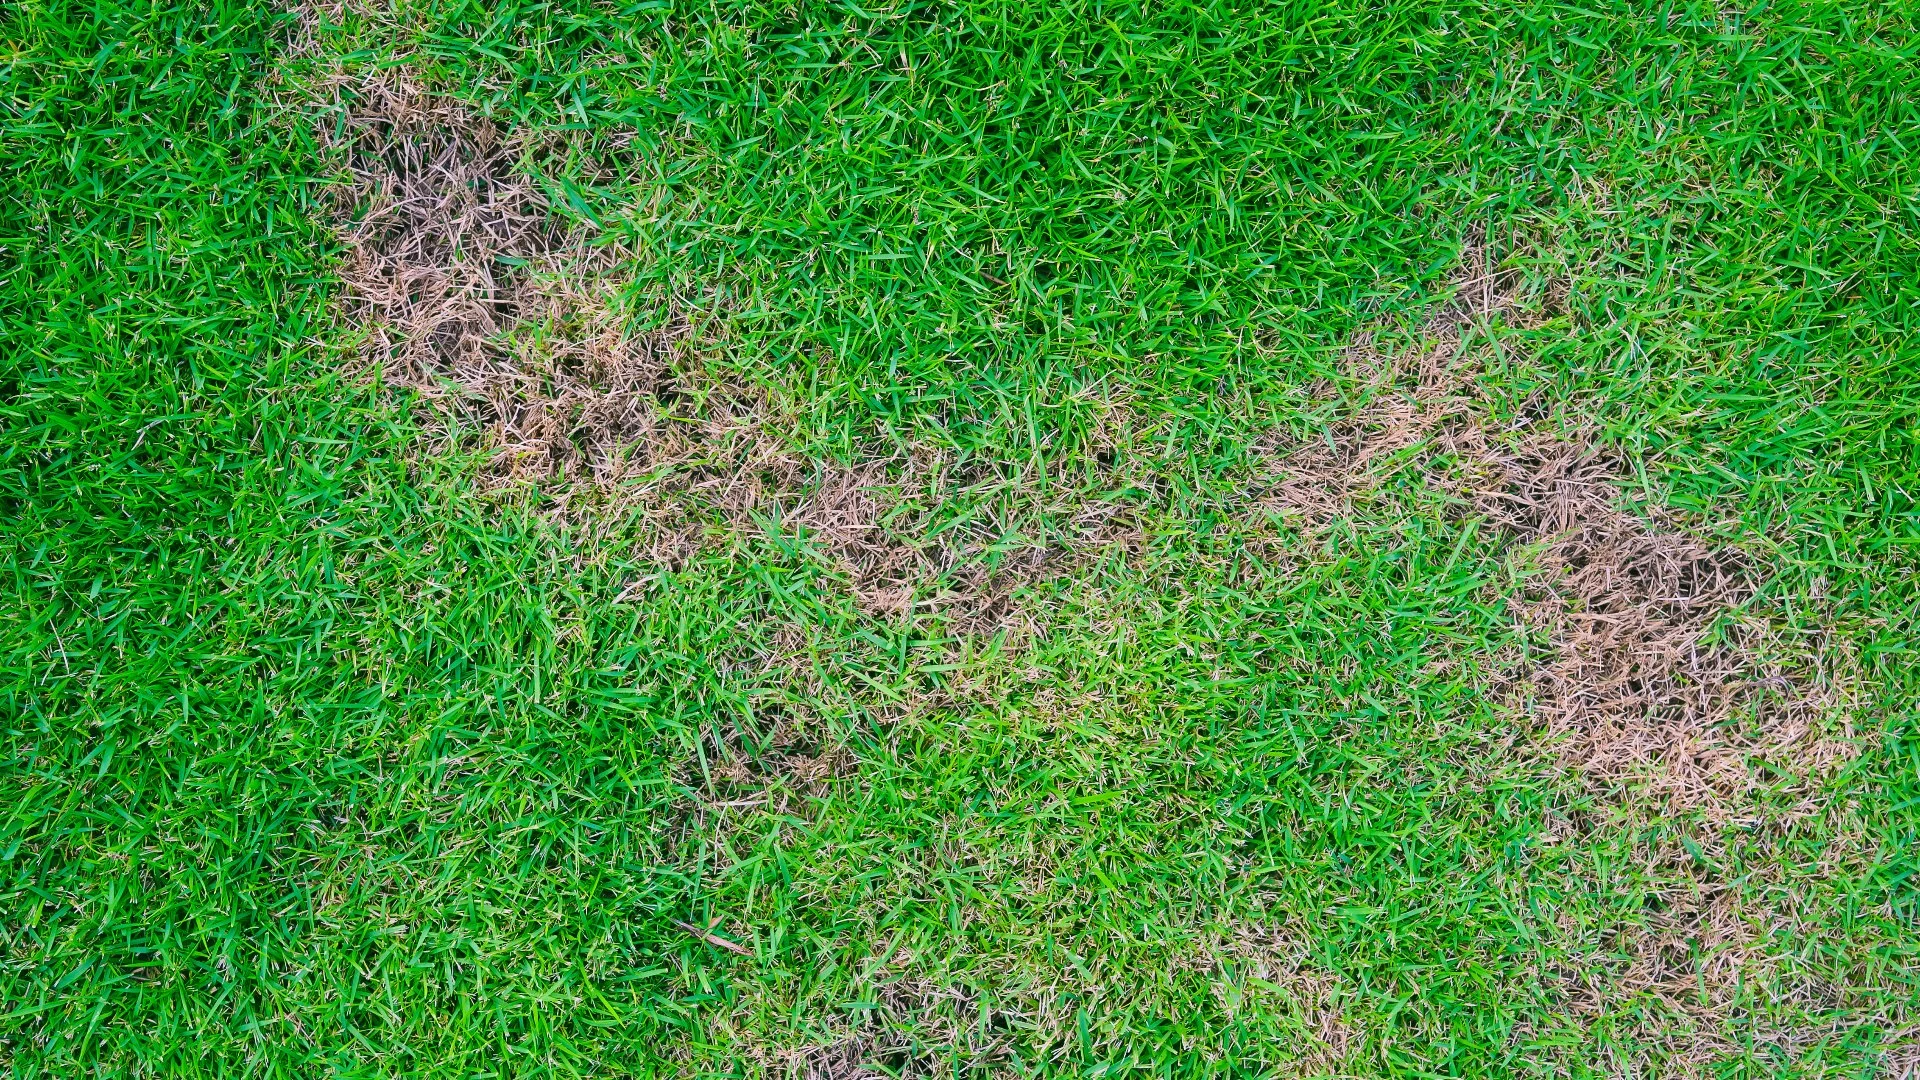 Are Your Grass Blades Turning Pinkish-Red? Here’s What To Do About Red Thread